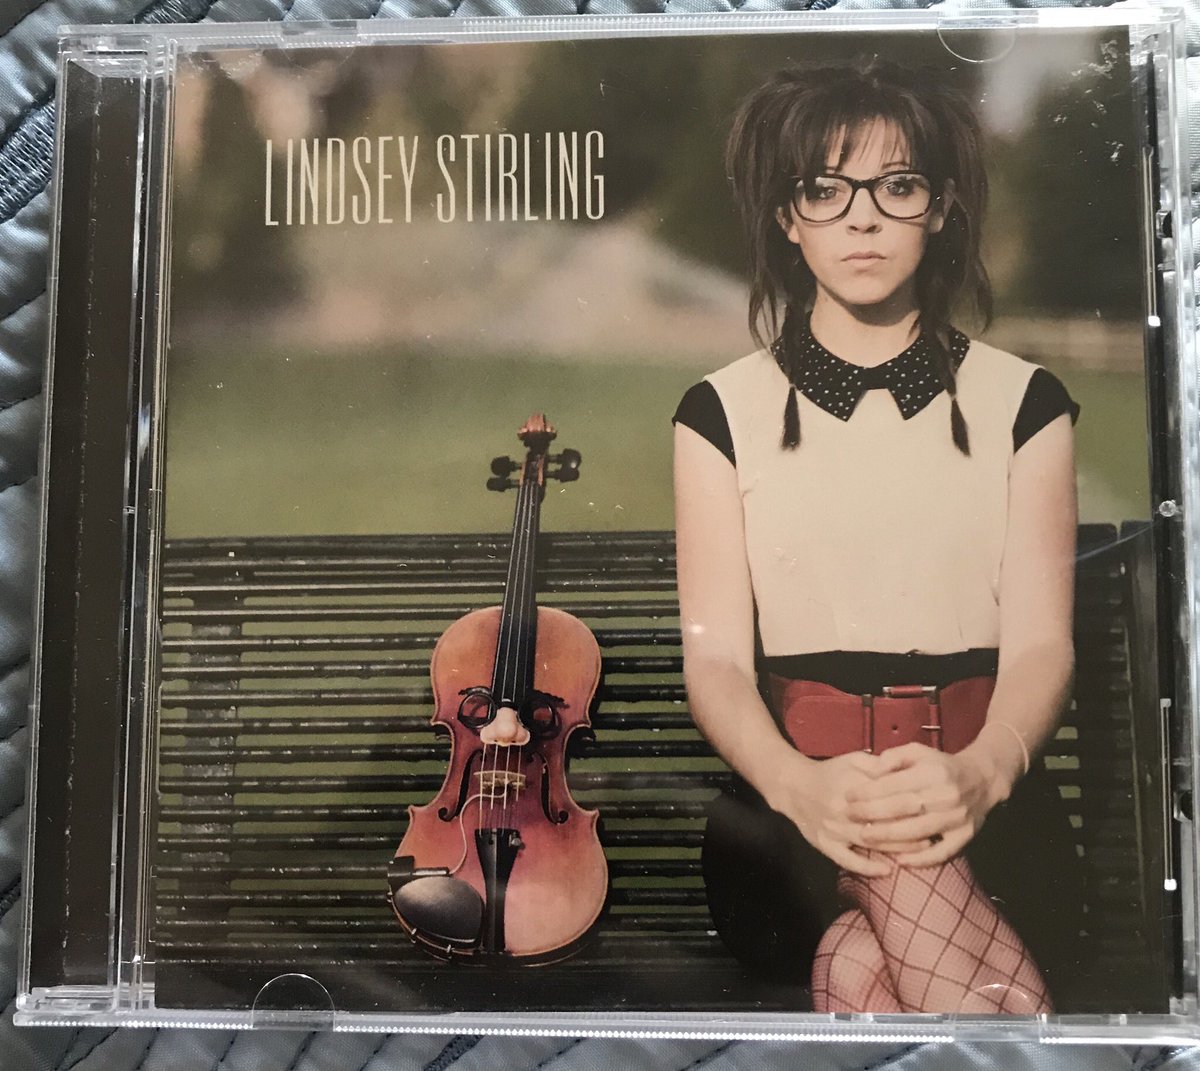 #5: Lindsey Sterling’s self titled album. I remember hearing her music for the first time. Love 